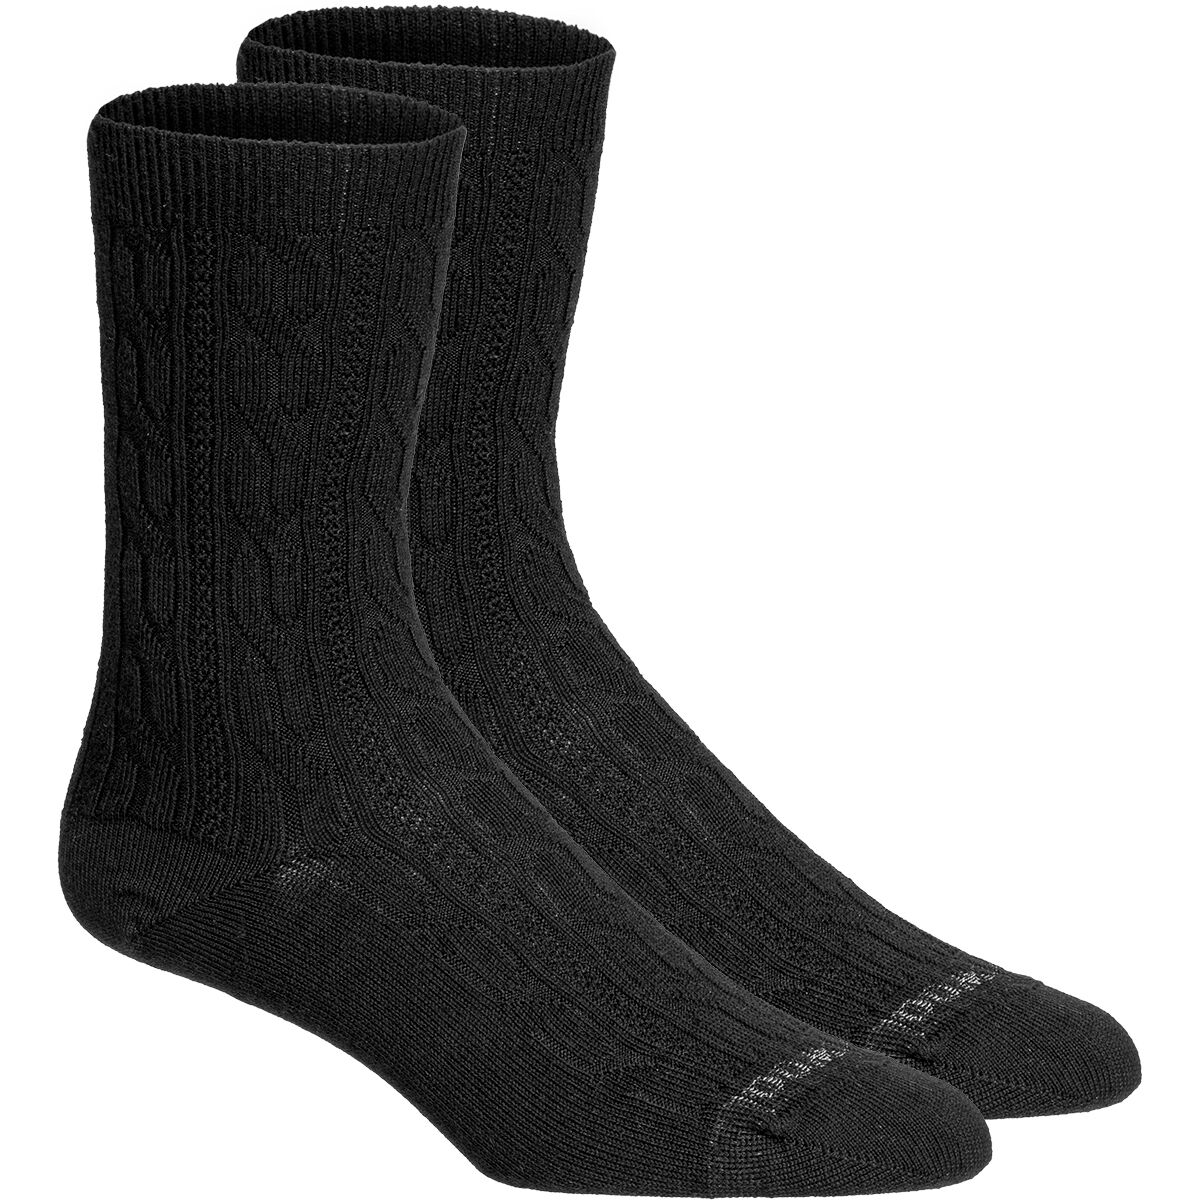 Smartwool Everyday Cable Crew Sock - 2-Pack - Women's